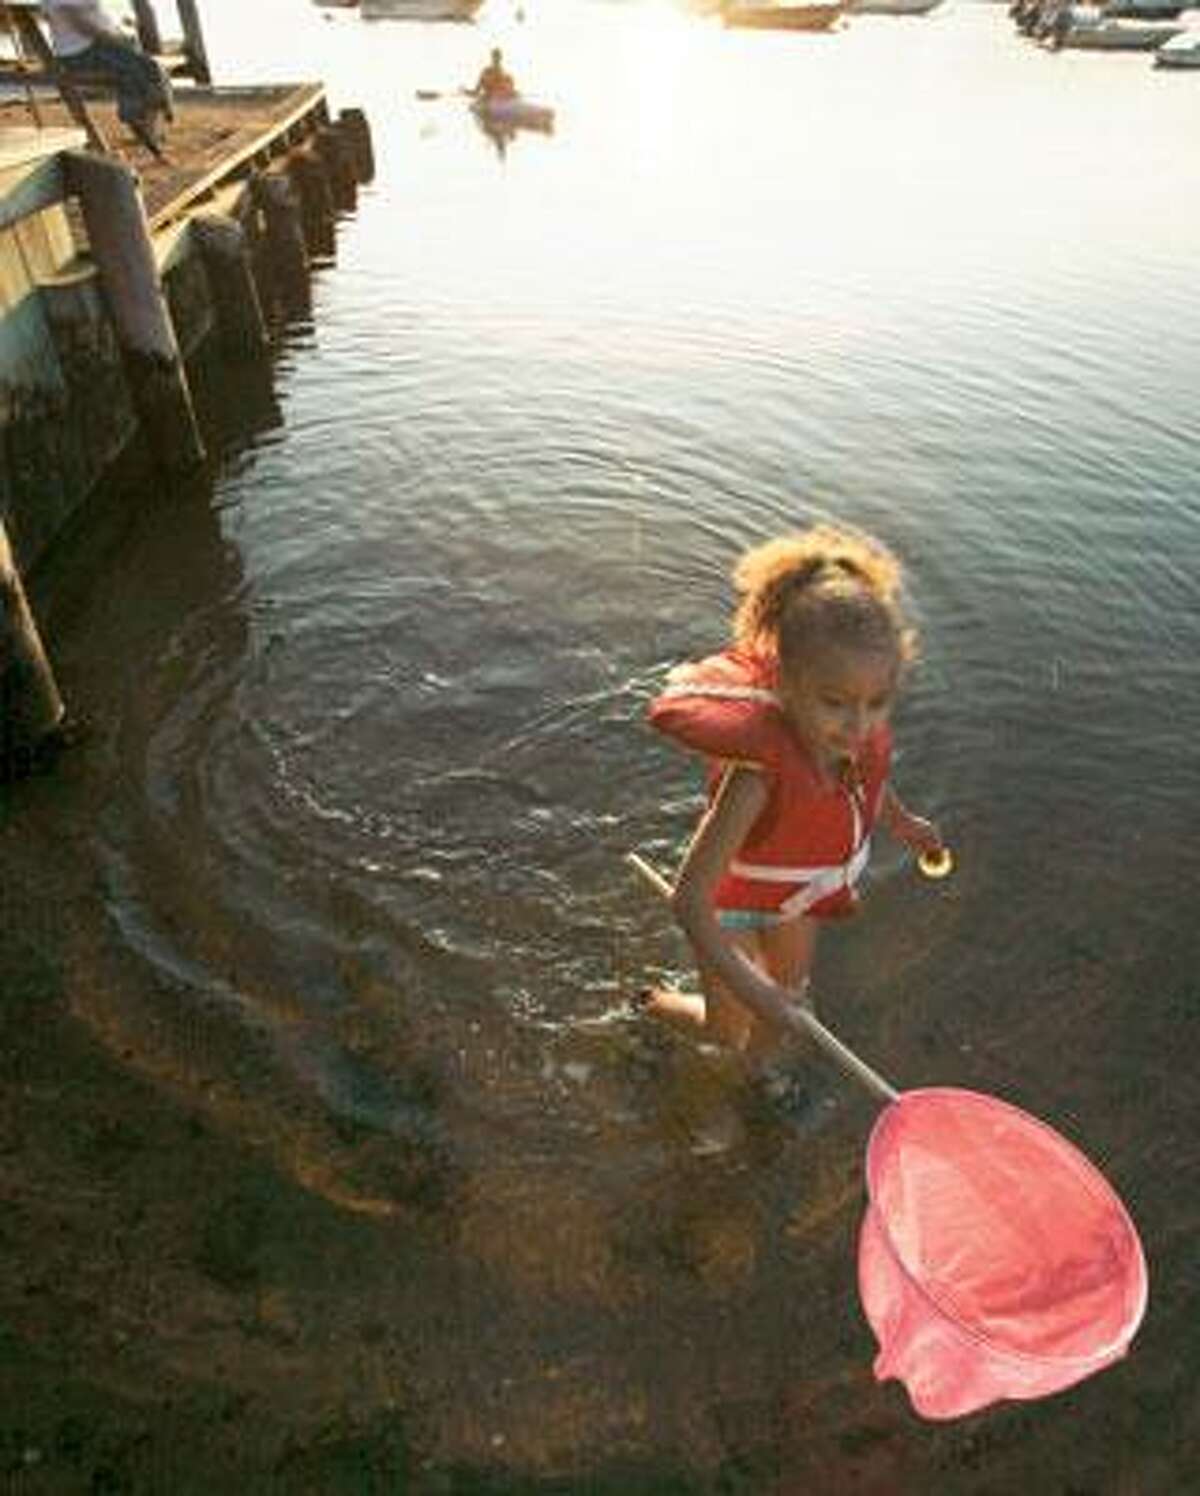 Shine Andersen, 5, of New York, N.Y., carries a fish net as she wades in Nashaquitsa Pond, in Nashaquitsa, on the island of Martha's Vineyard, Mass. Decades before President Barack Obama's expected visit this month, Martha's Vineyard was a summer sanctuary for middle-class black families unwelcome elsewhere. (Associated Press photos)